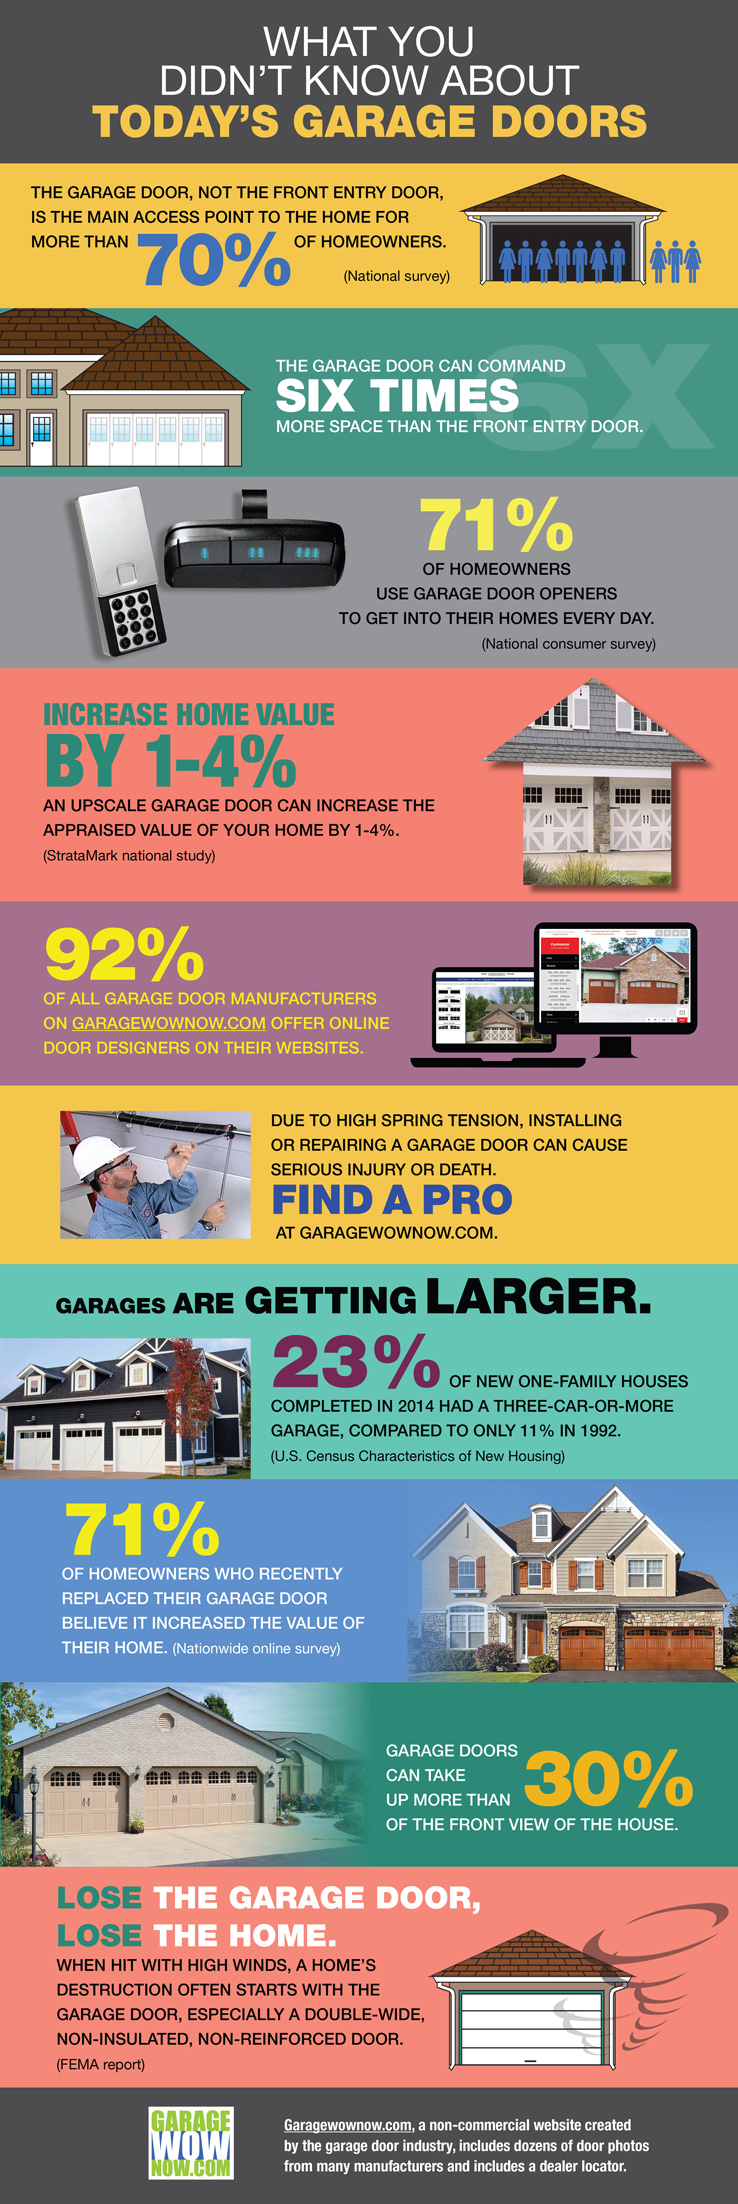 What you didn't know about today's garage doors - infographic